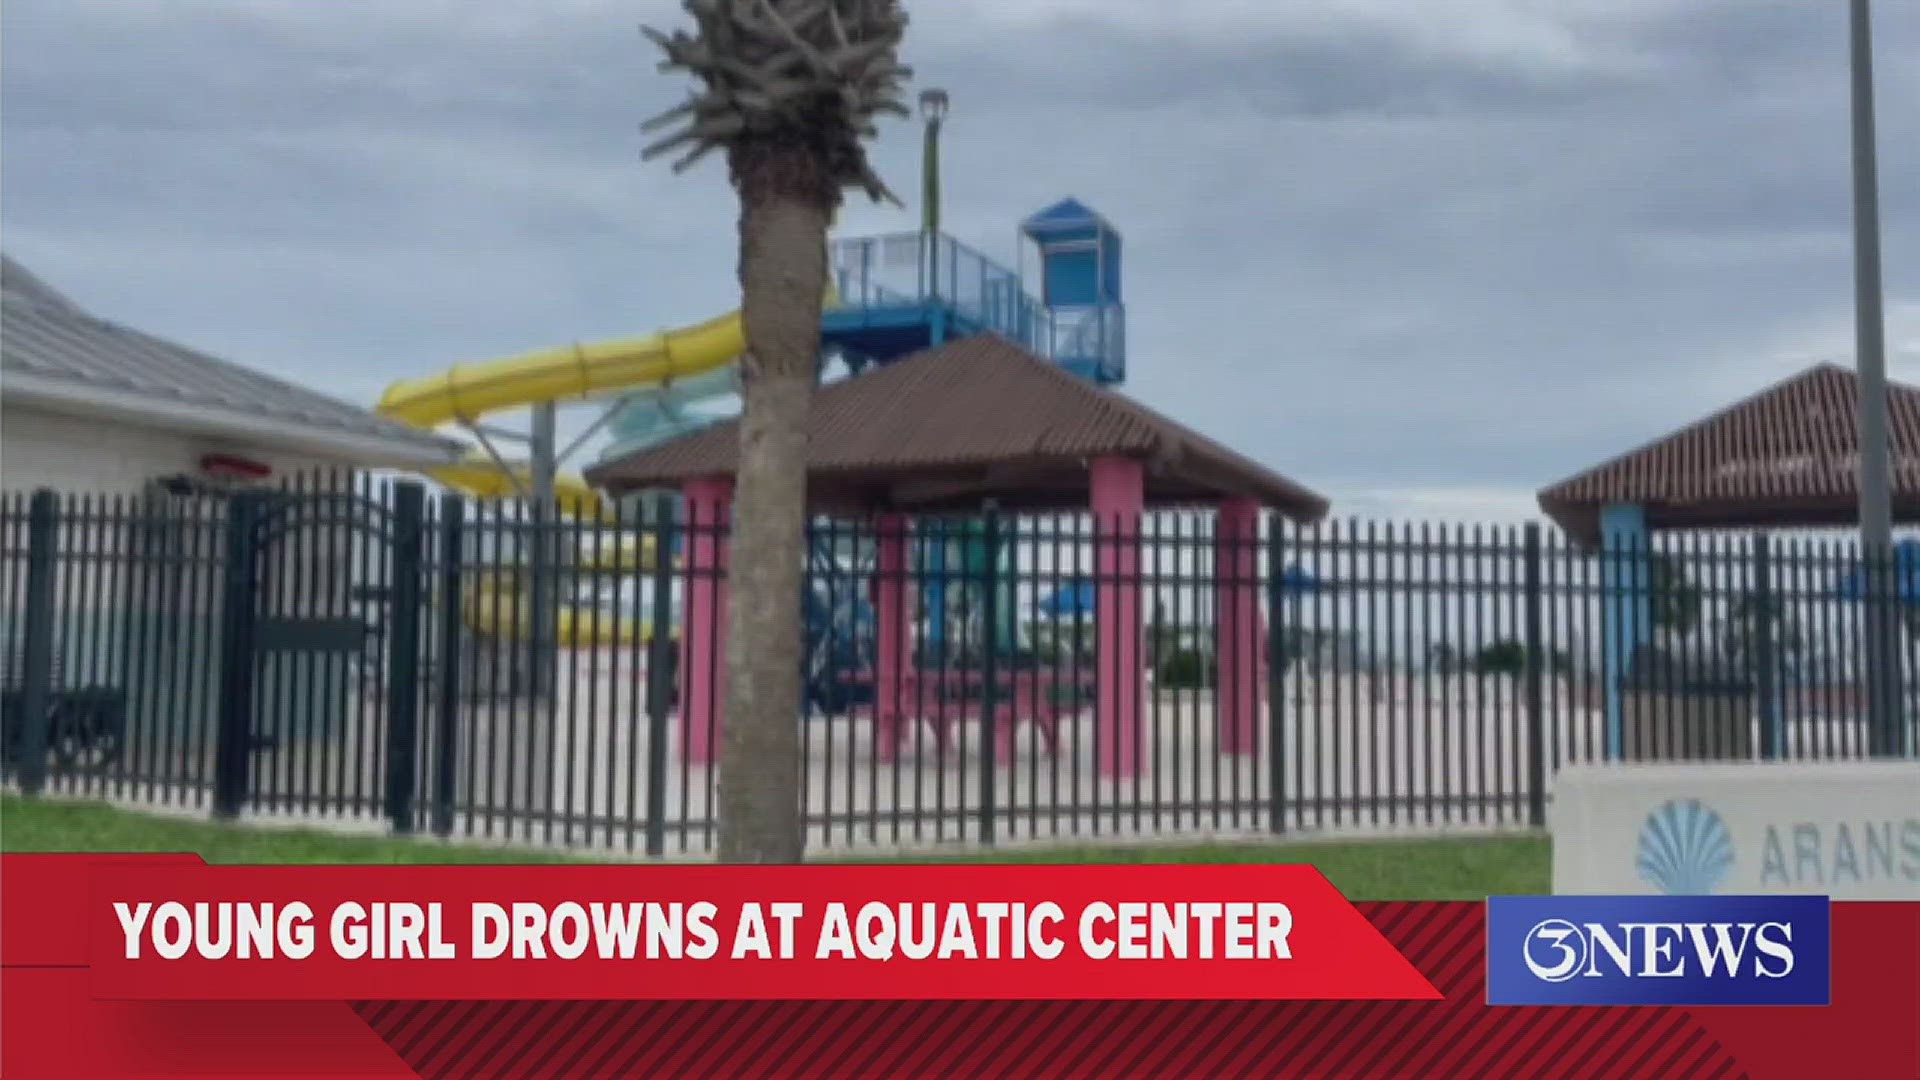 Aransas Pass Police Department Chief Eric Blanchard said the child was being supervised by adults, but she went underwater and did not immediately come back up.